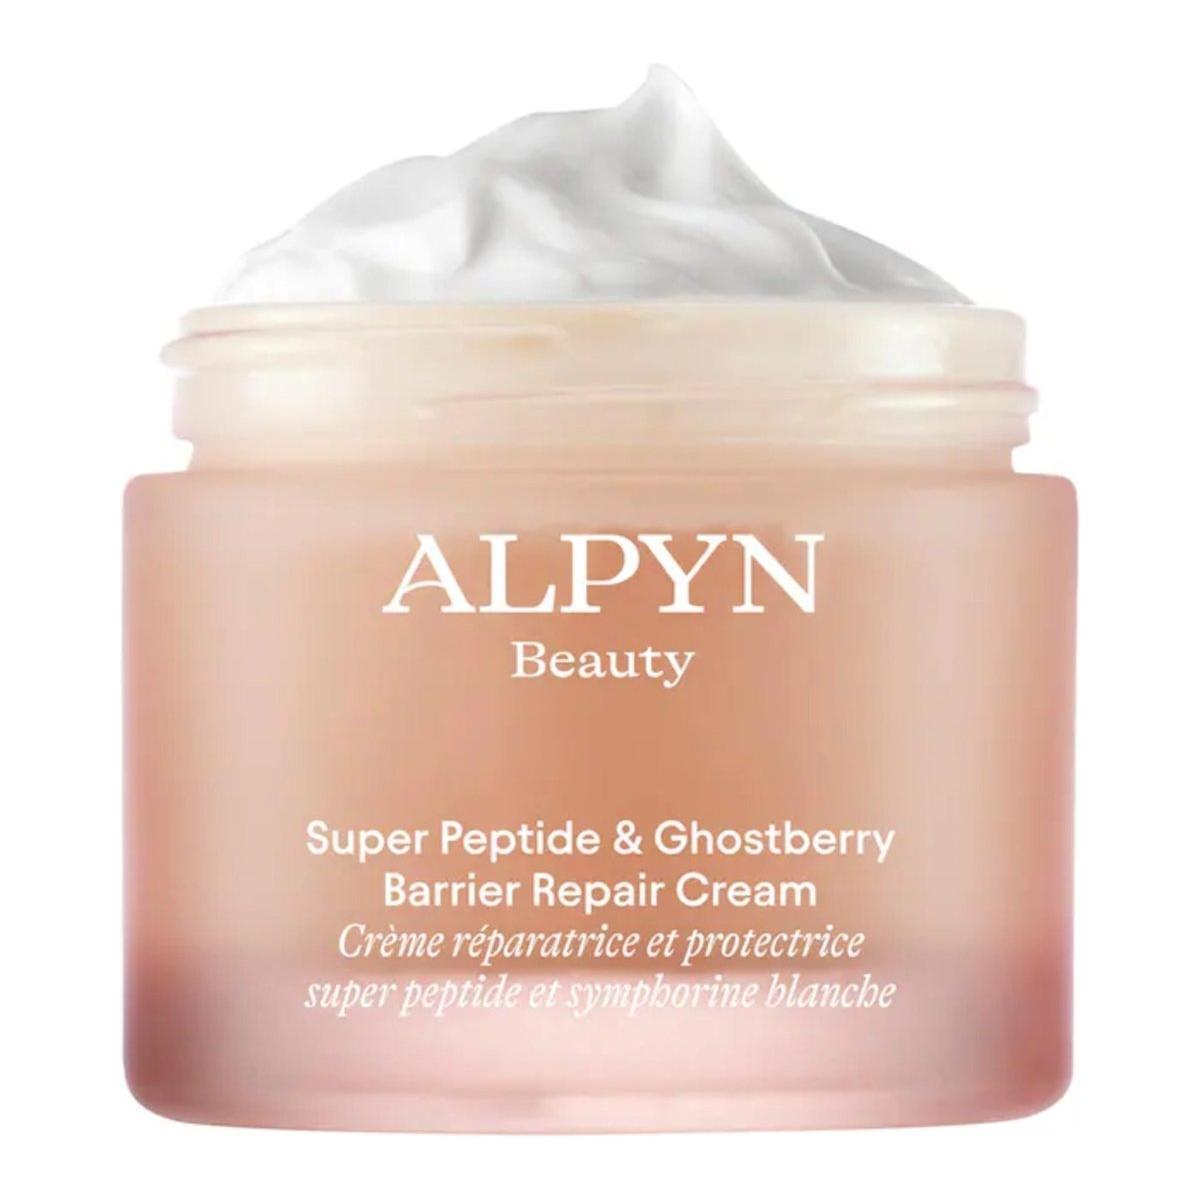 Super Peptide and Ghostberry Barrier Repair Cream - Glam Global UK